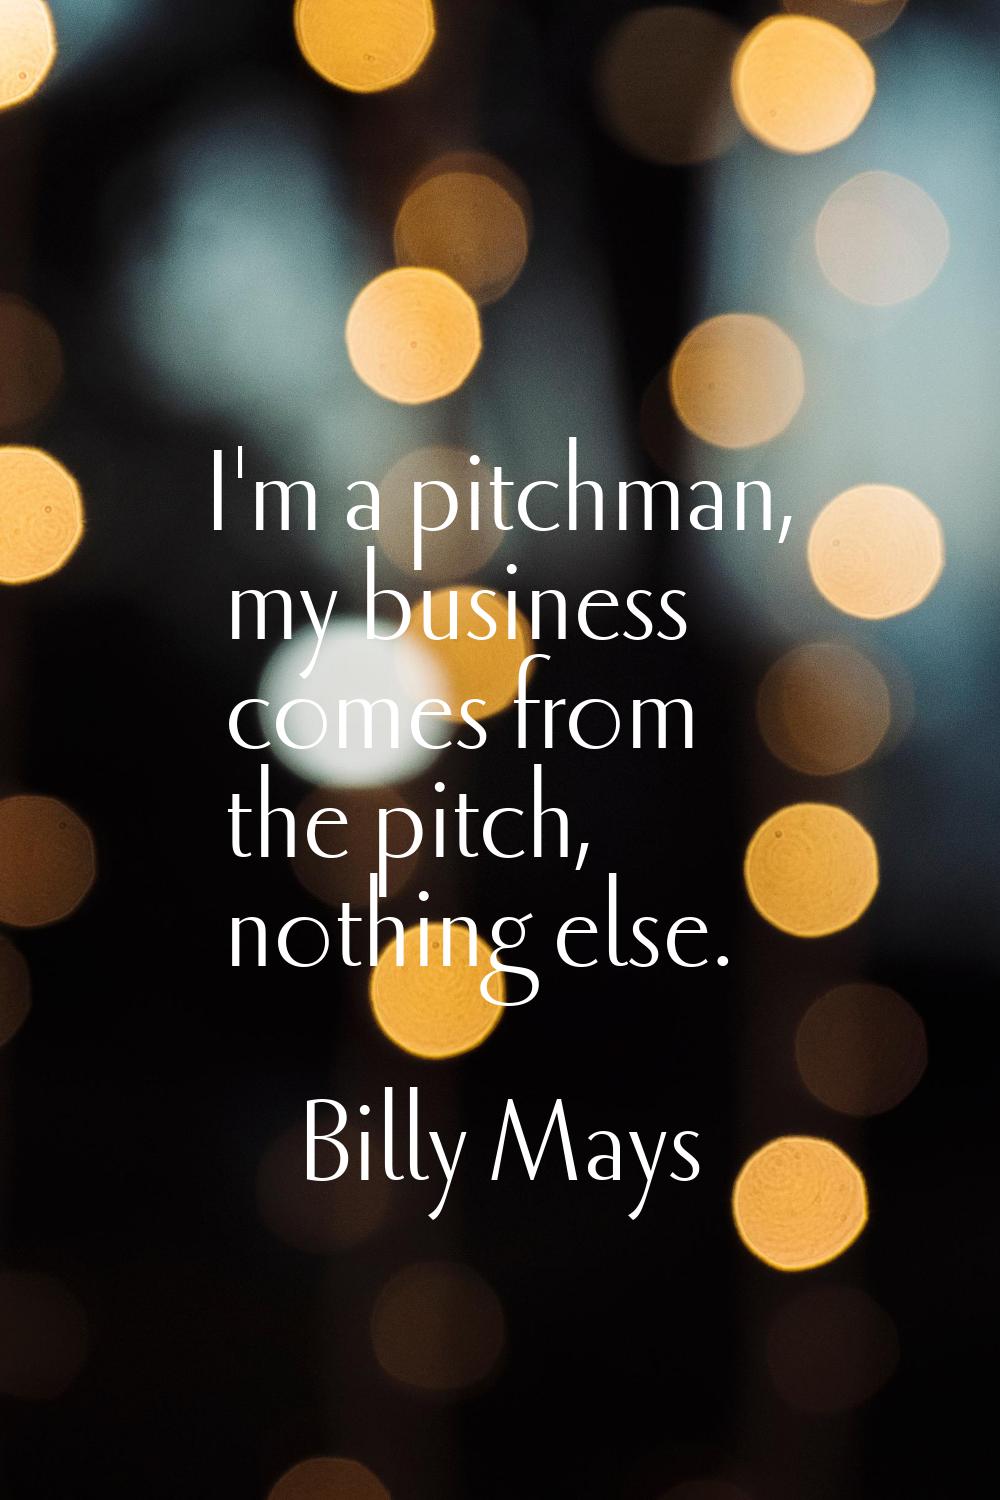 I'm a pitchman, my business comes from the pitch, nothing else.